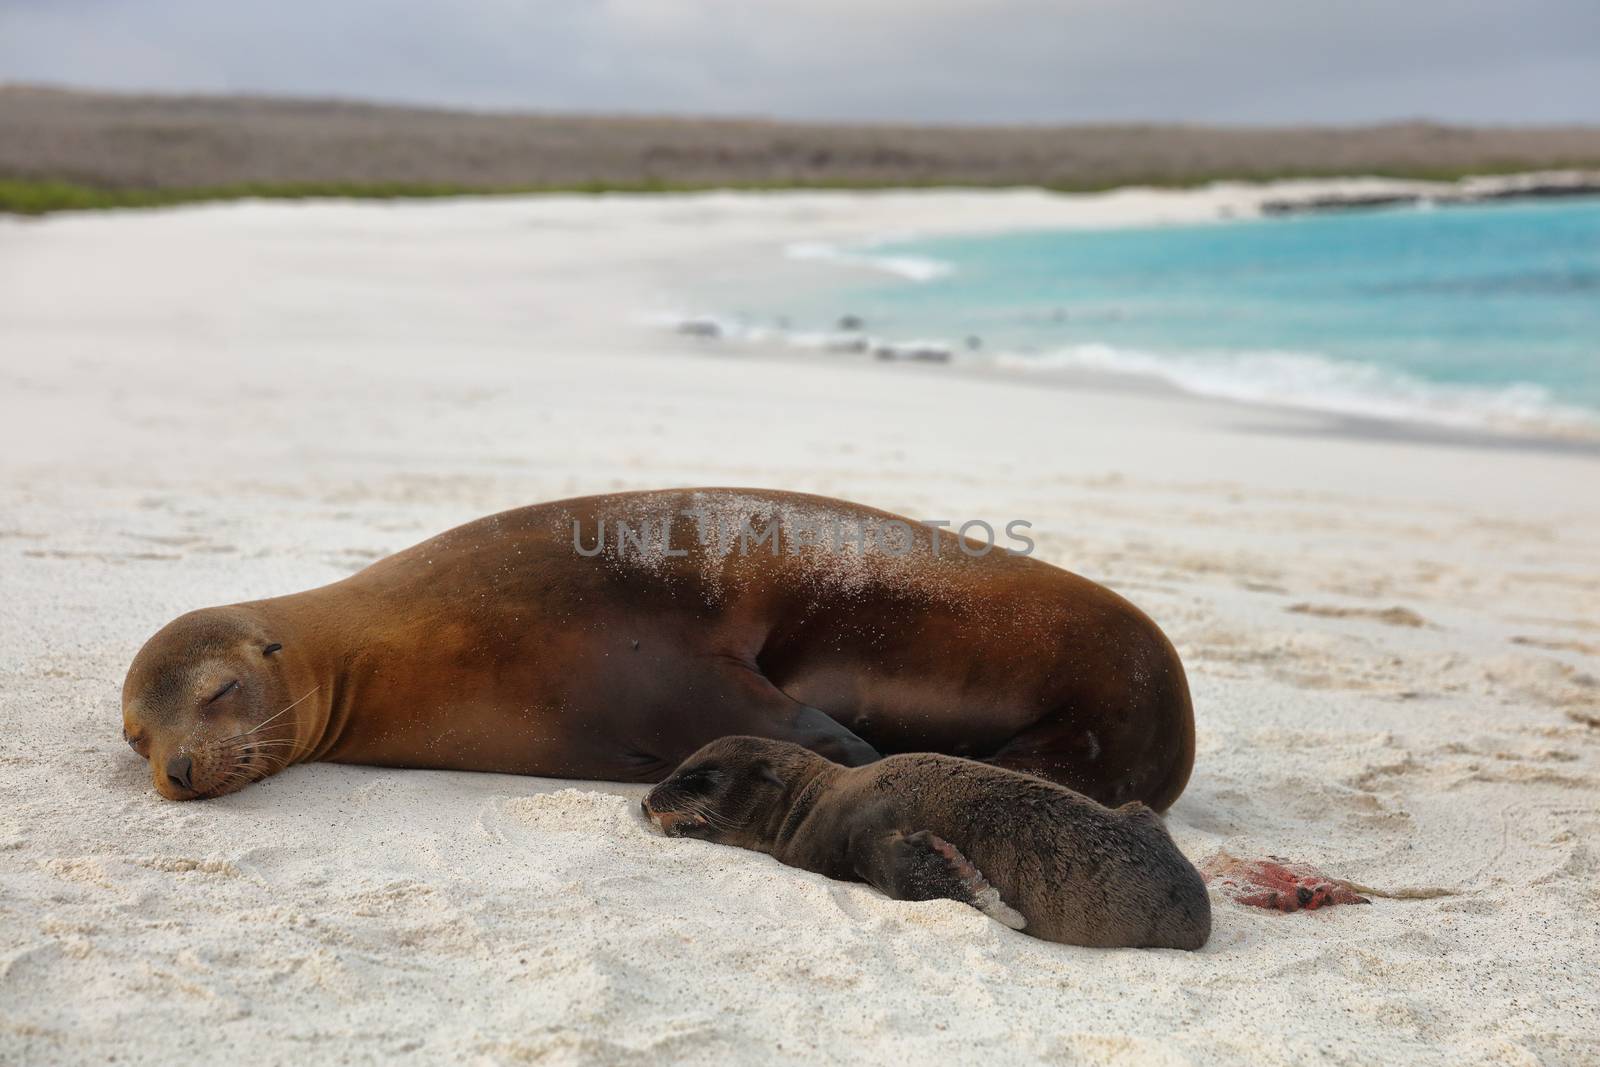 Galapagos islands animals. Newborn baby sea lion pup right after birth next to mother sea lion. Galapagos island cruise ship excursion Gardner Bay Beach, Espanola Island, Galapagos Islands, Ecuador.